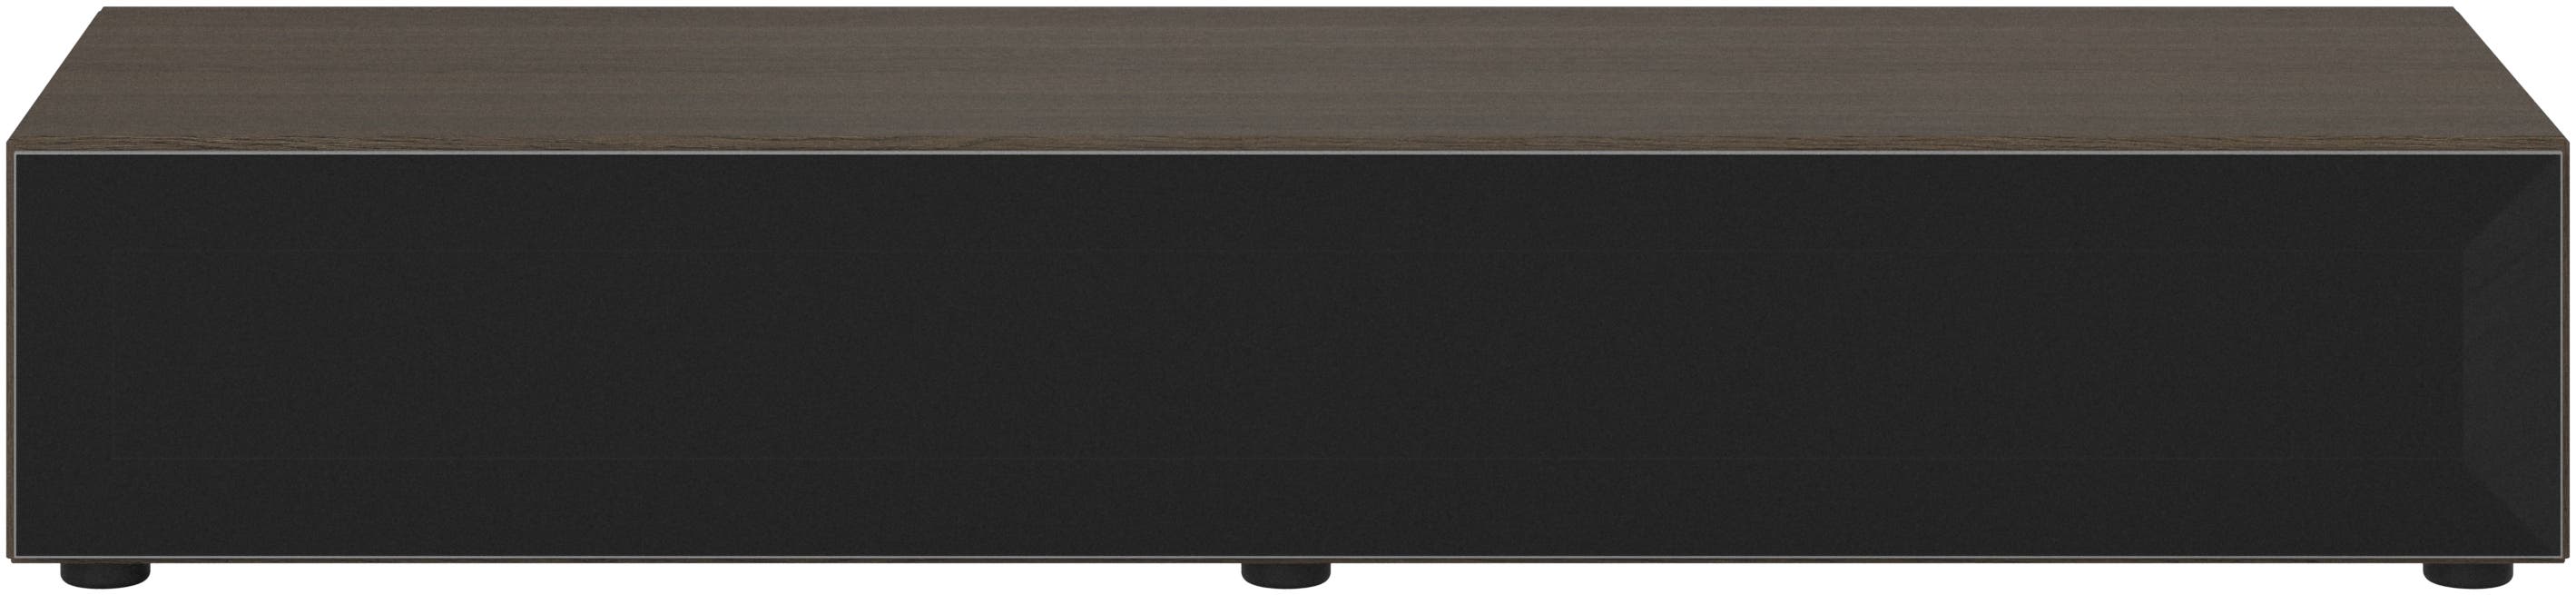 Lugano base cabinet with drop-down doors